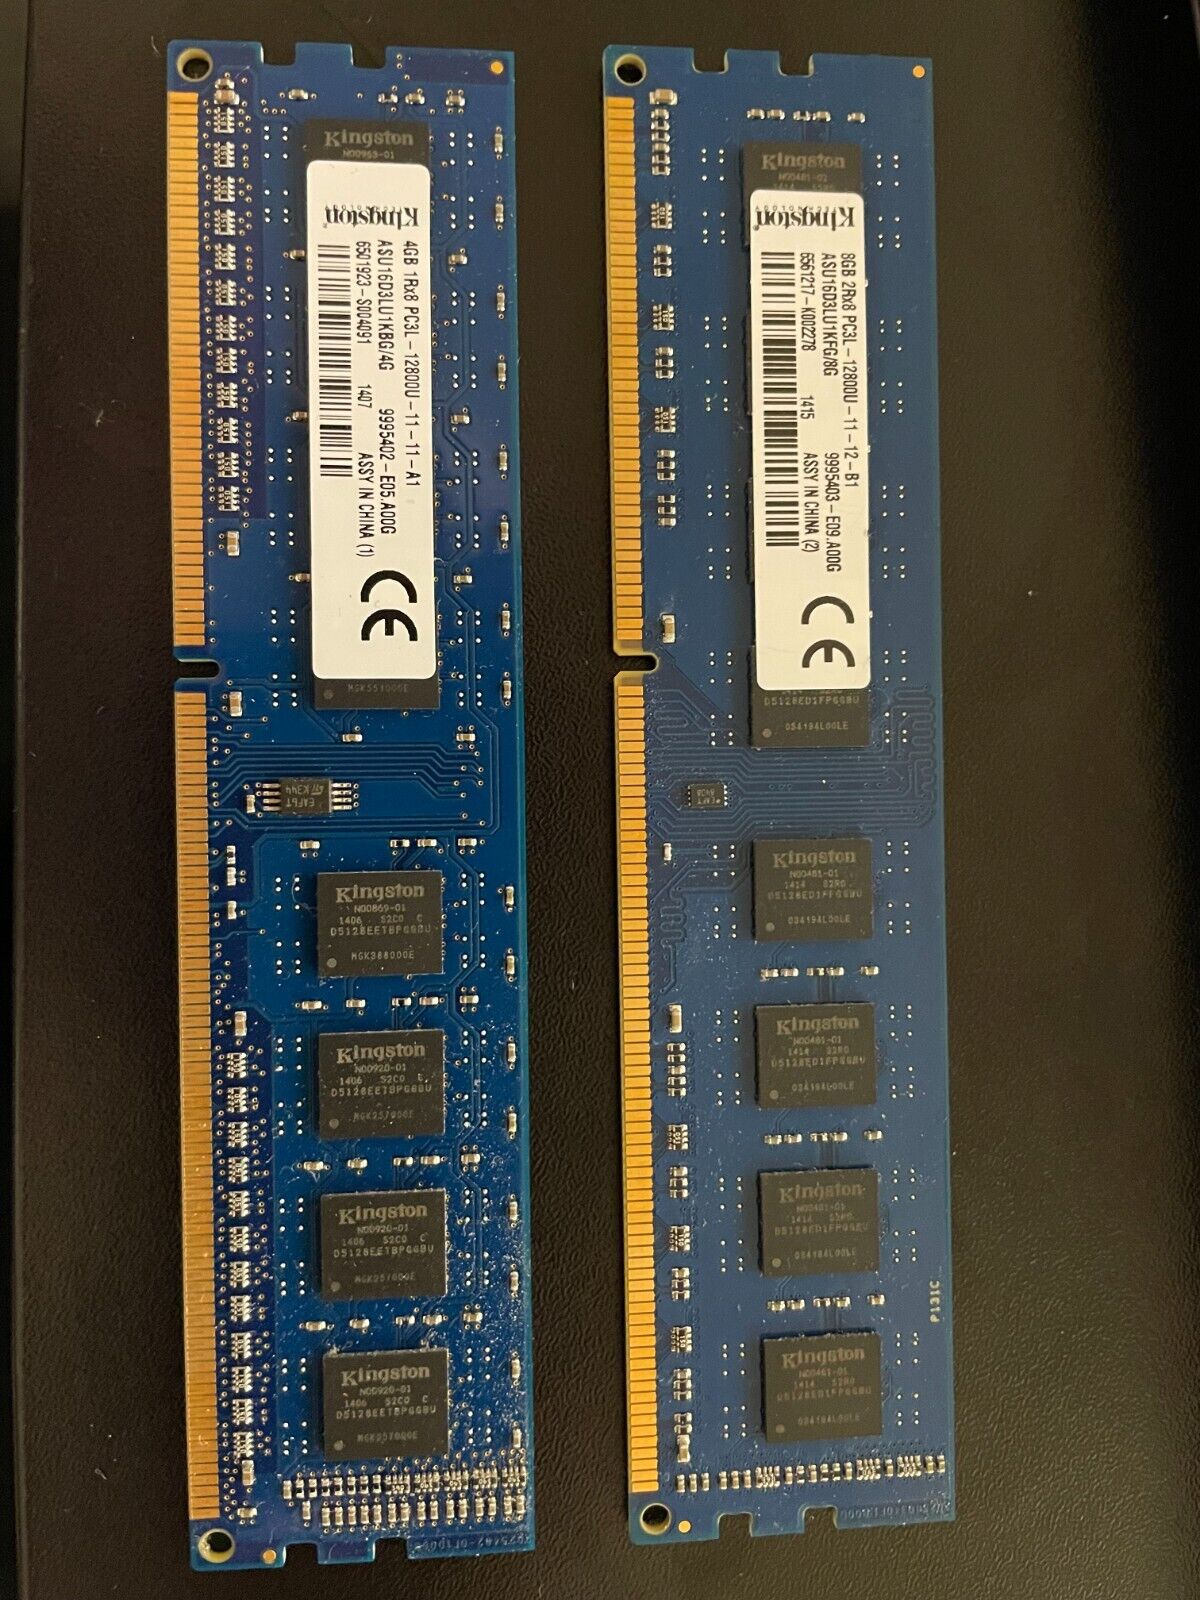 Kingston DDR3 4-8GB RAM (BOTH STICKS IN PHOTO FOR REFERENCE)